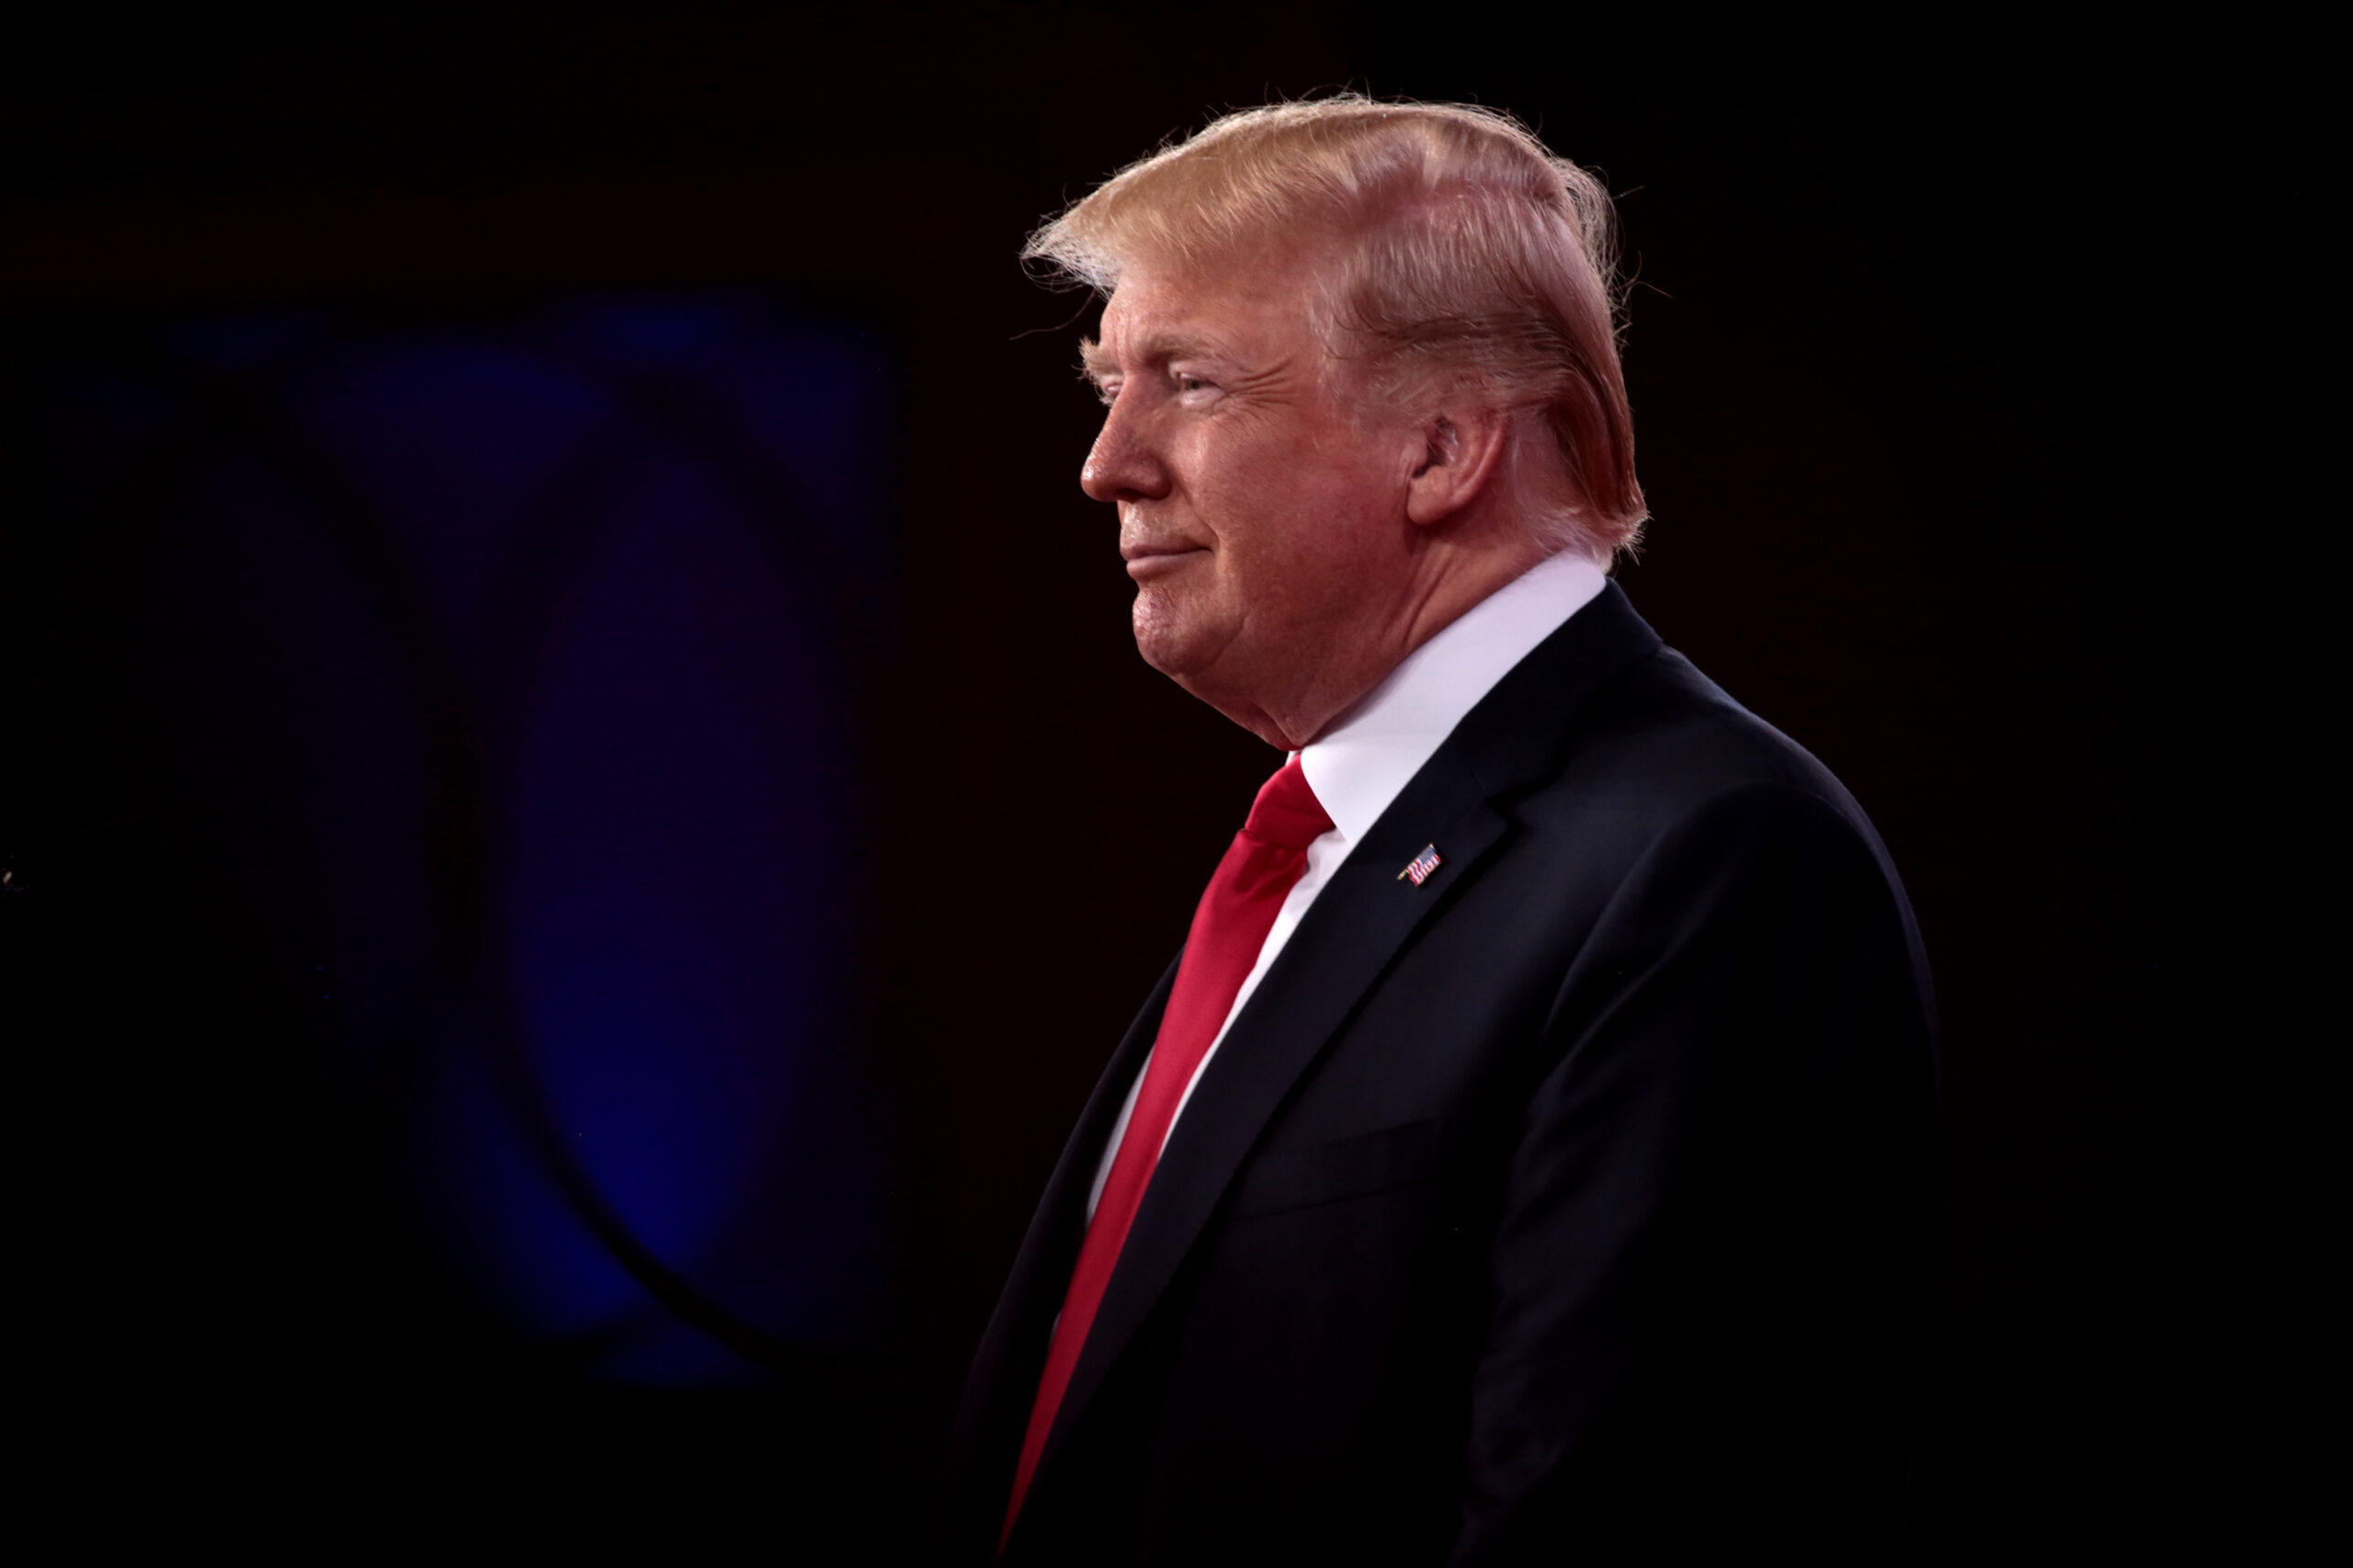 Photo of former president Donald Trump, in profile with a dark background